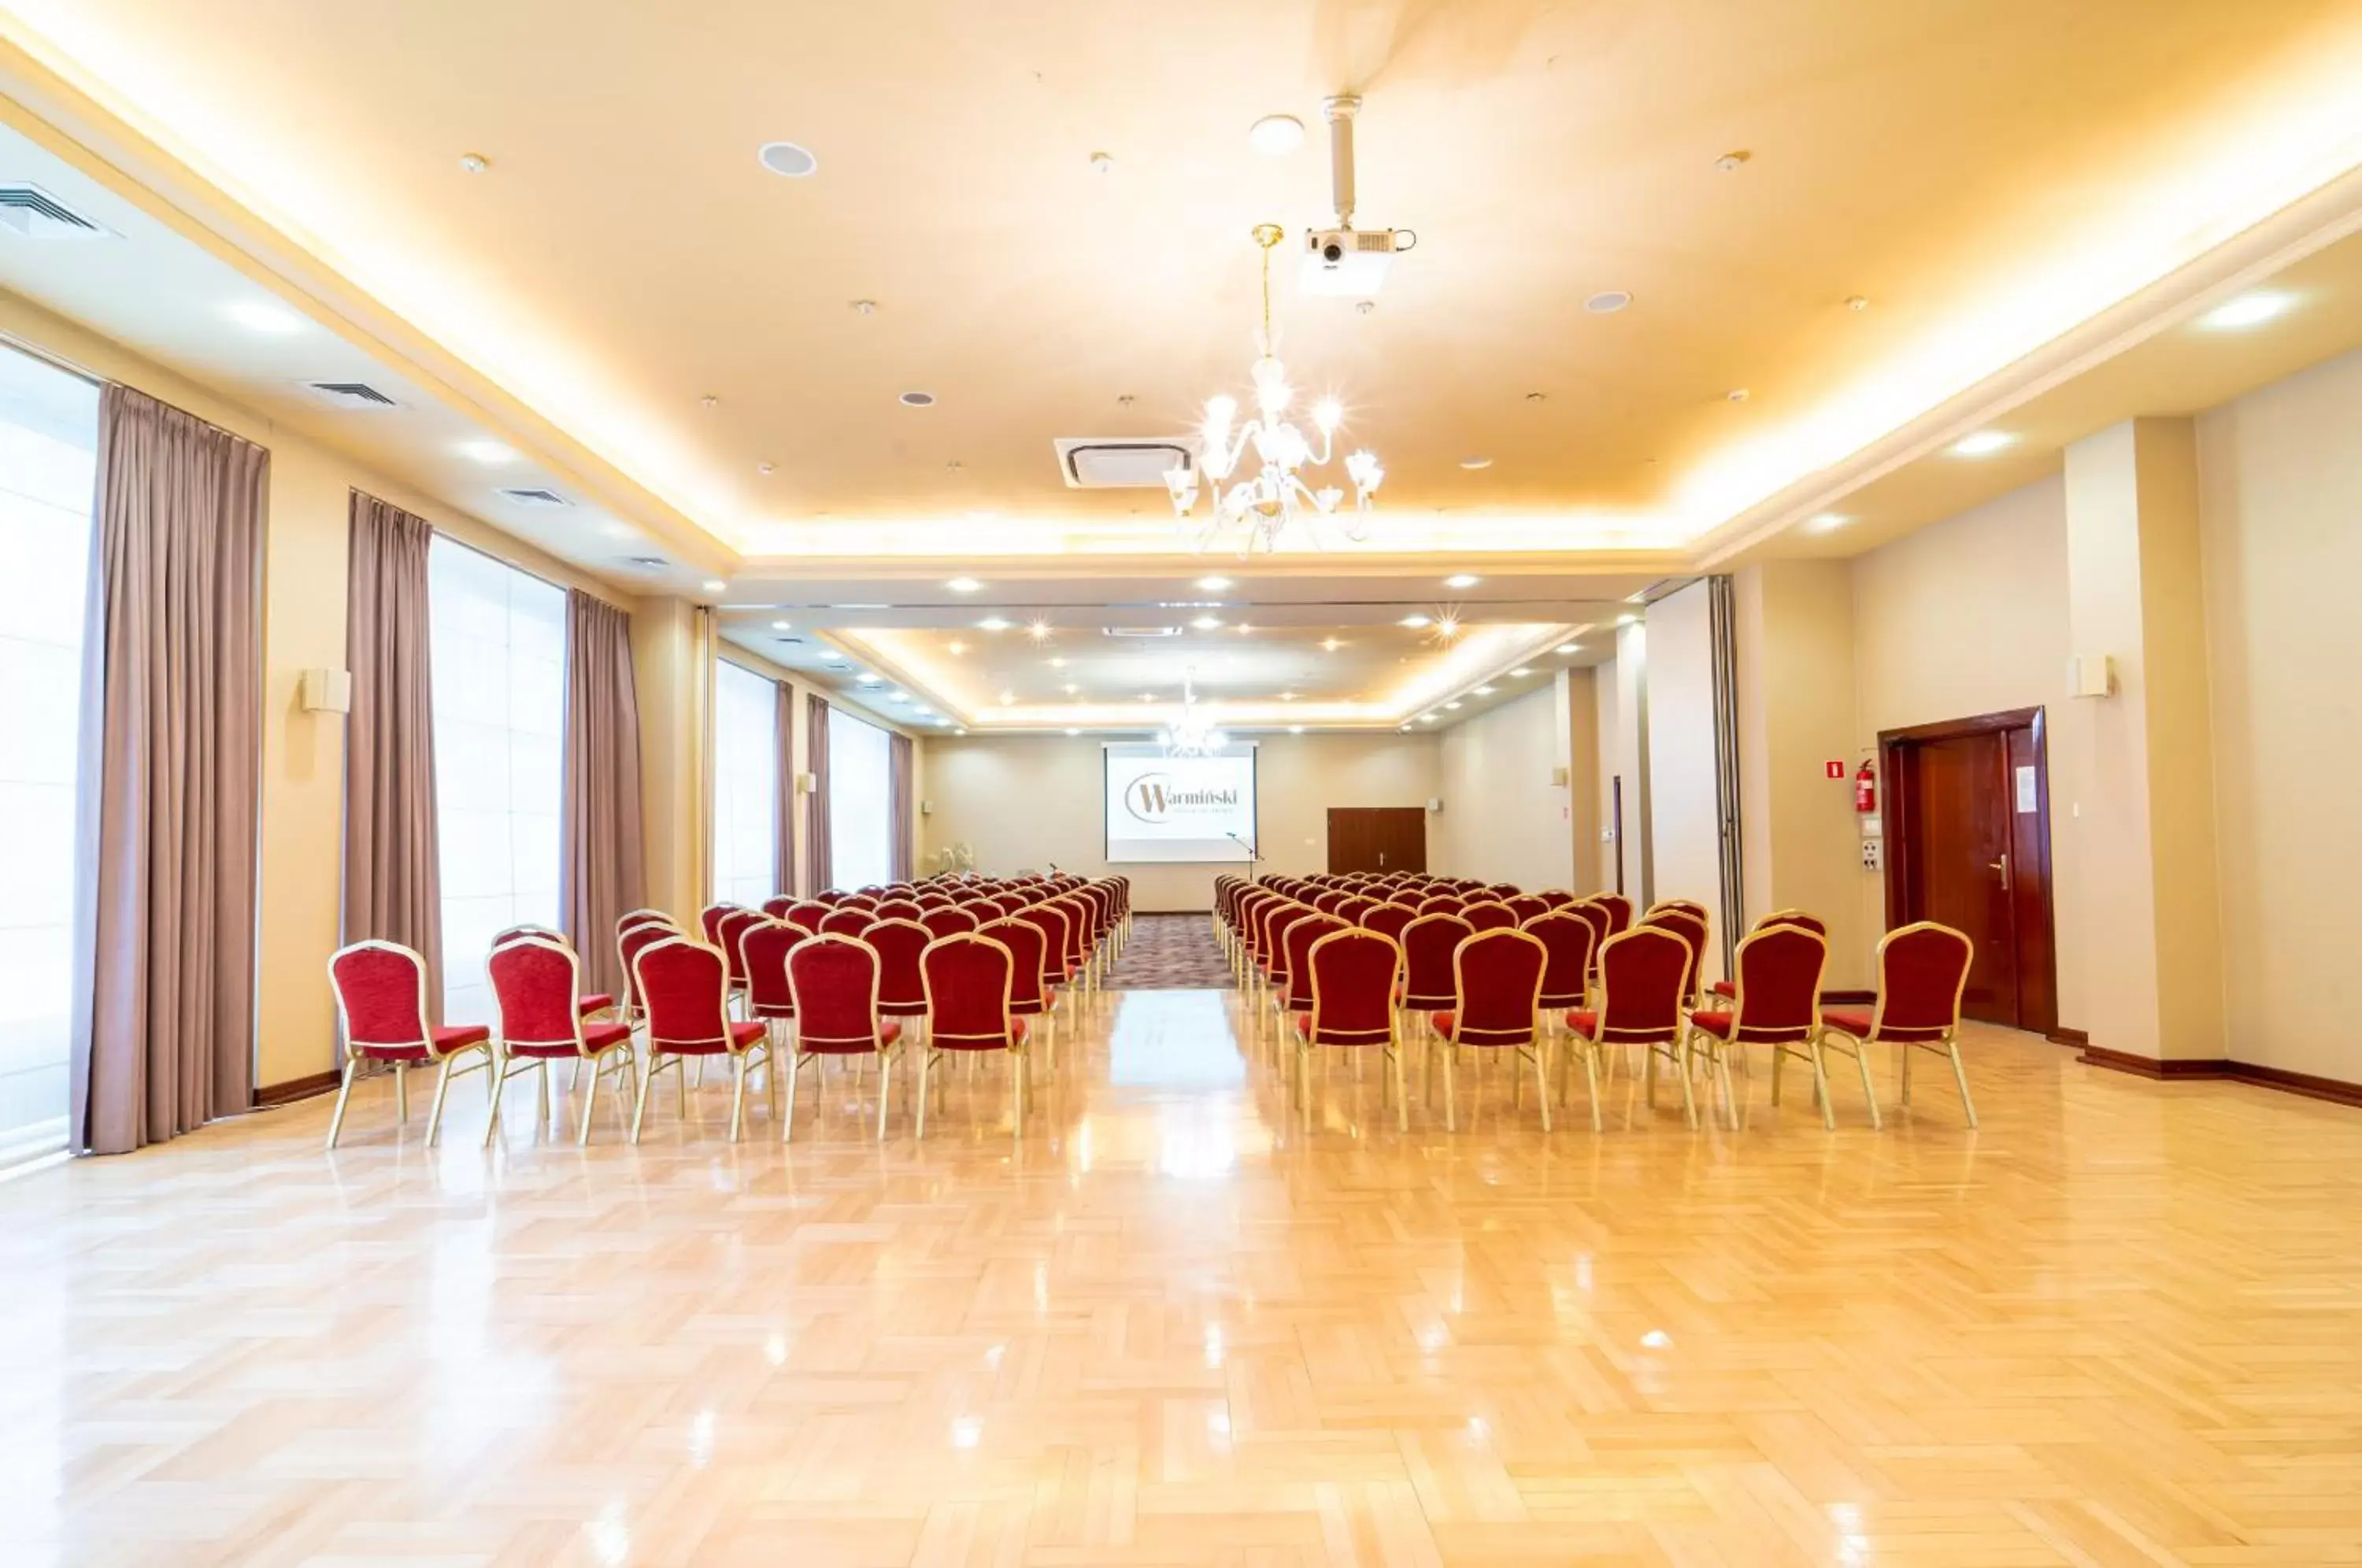 Meeting/conference room, Banquet Facilities in Warmiński Hotel & Conference